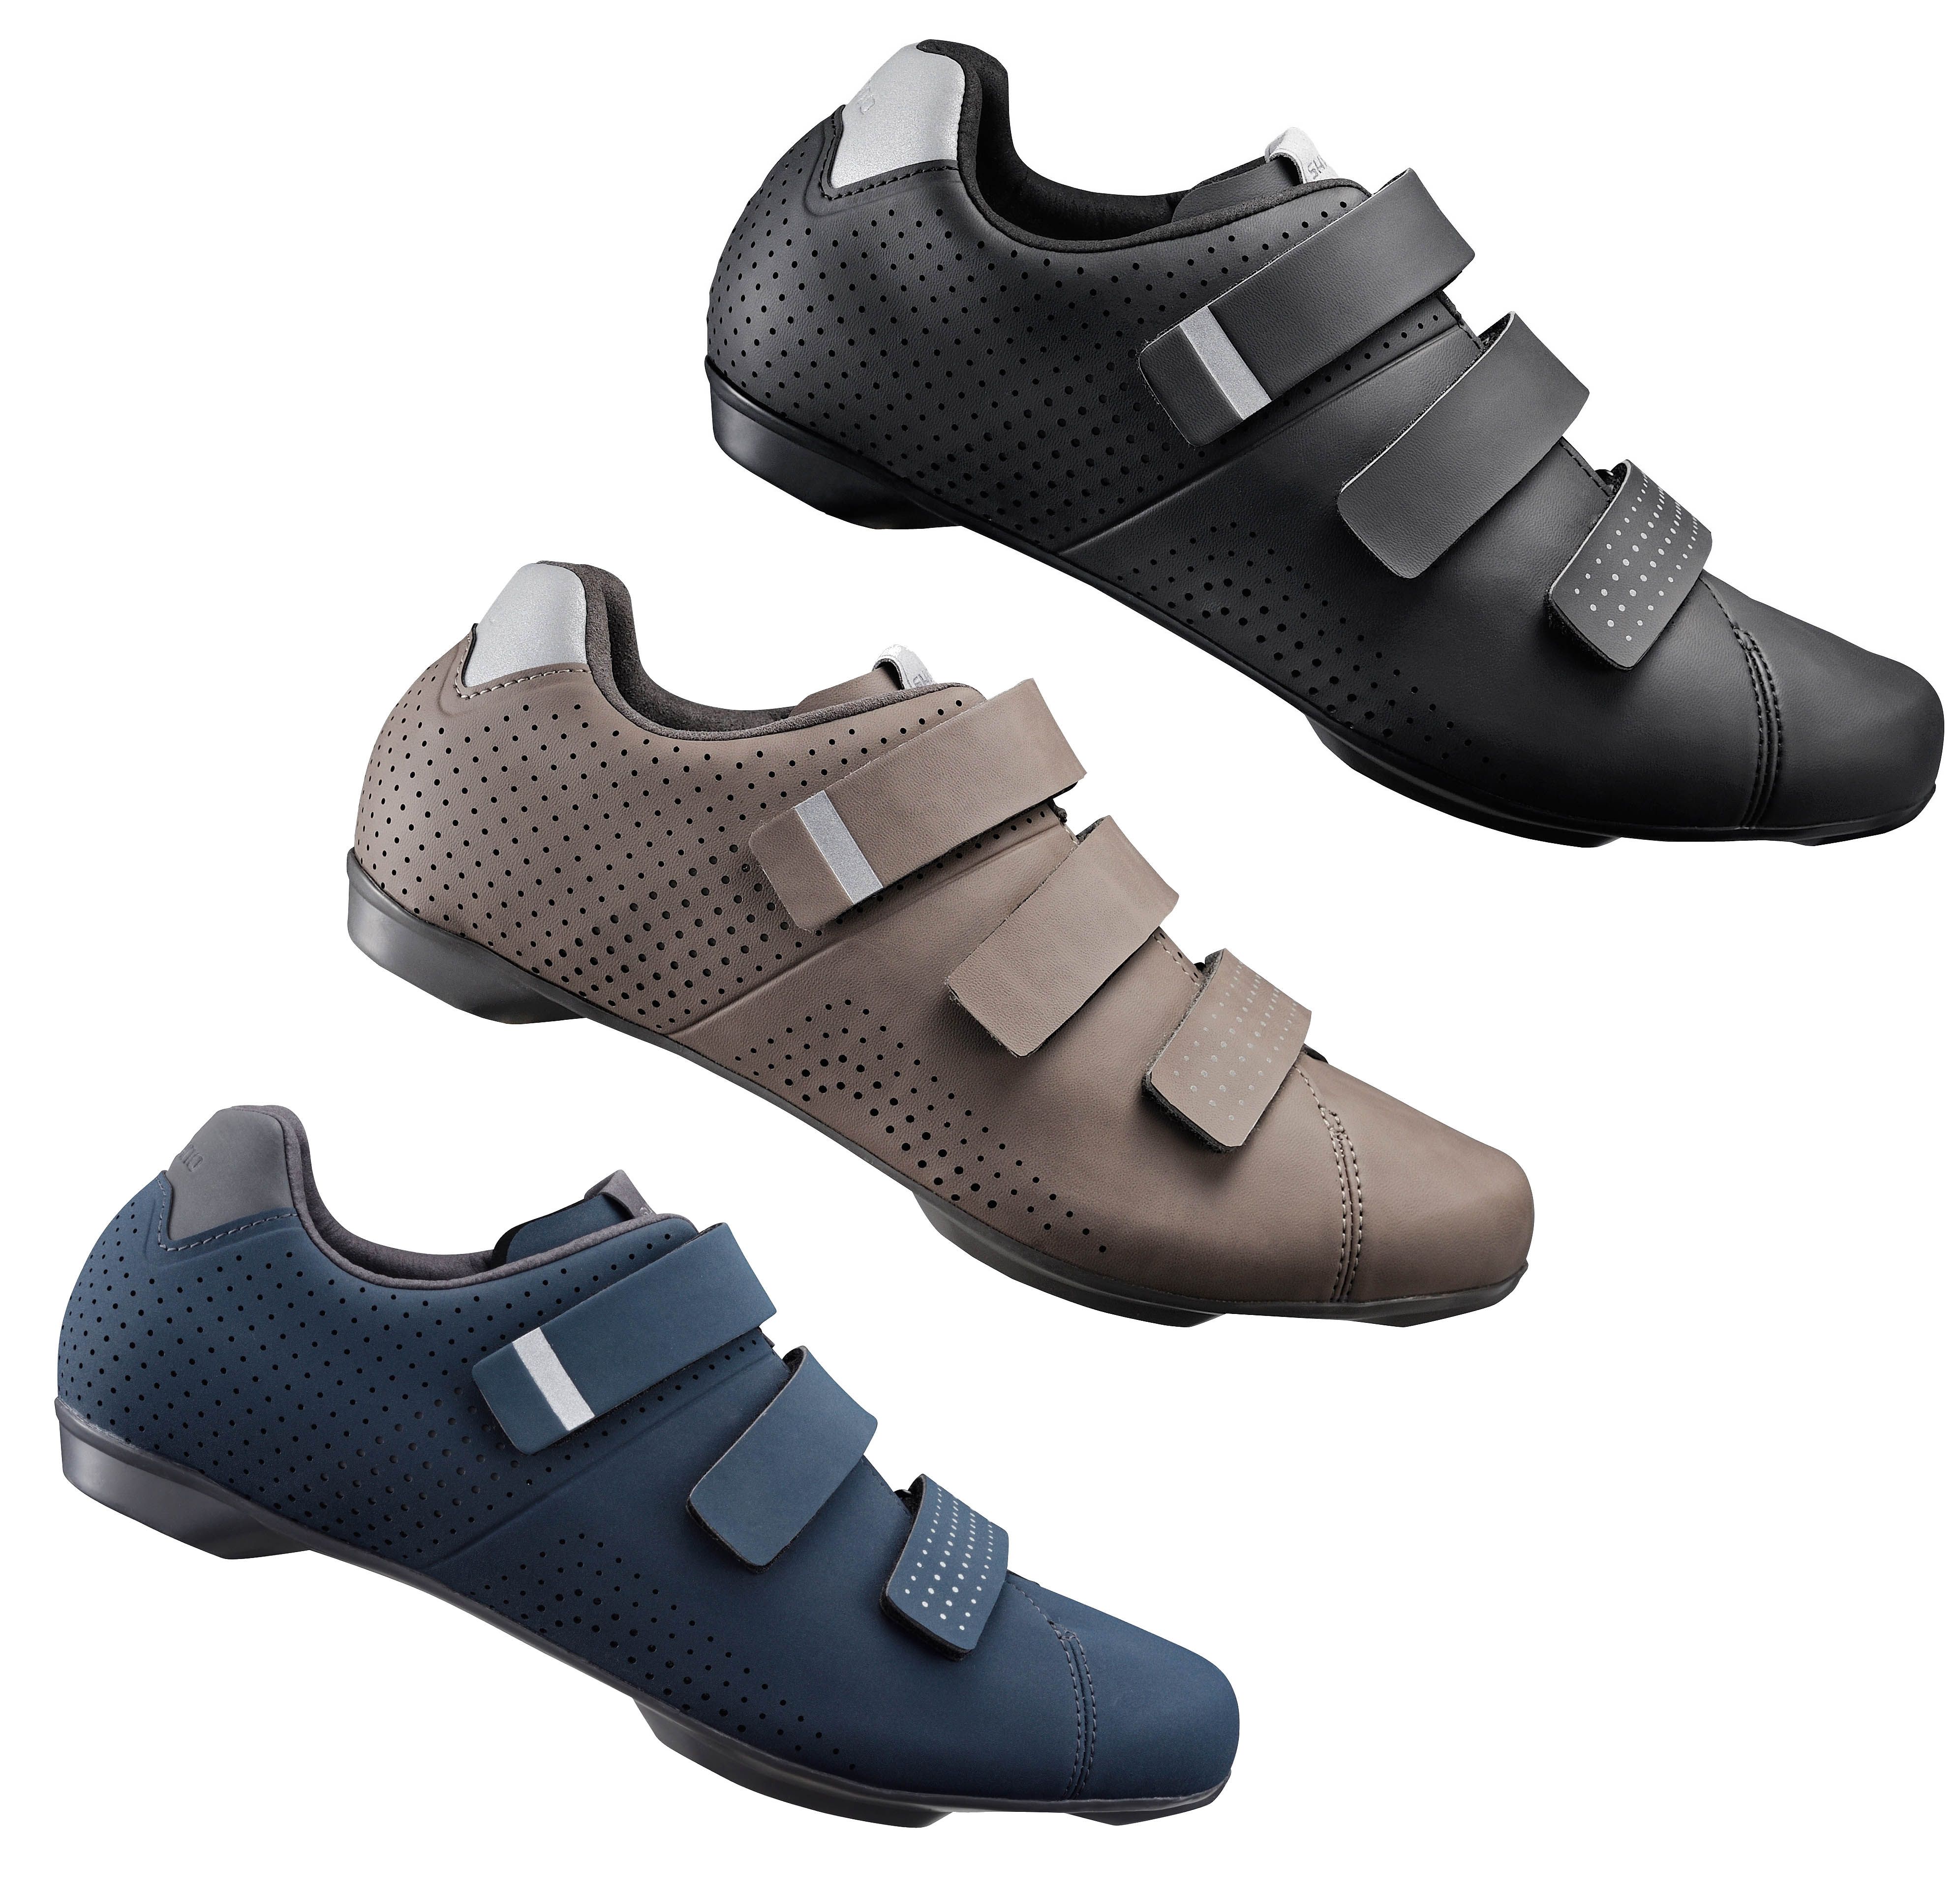 Shimano Rt5 Spd Road Shoes - £85.49 